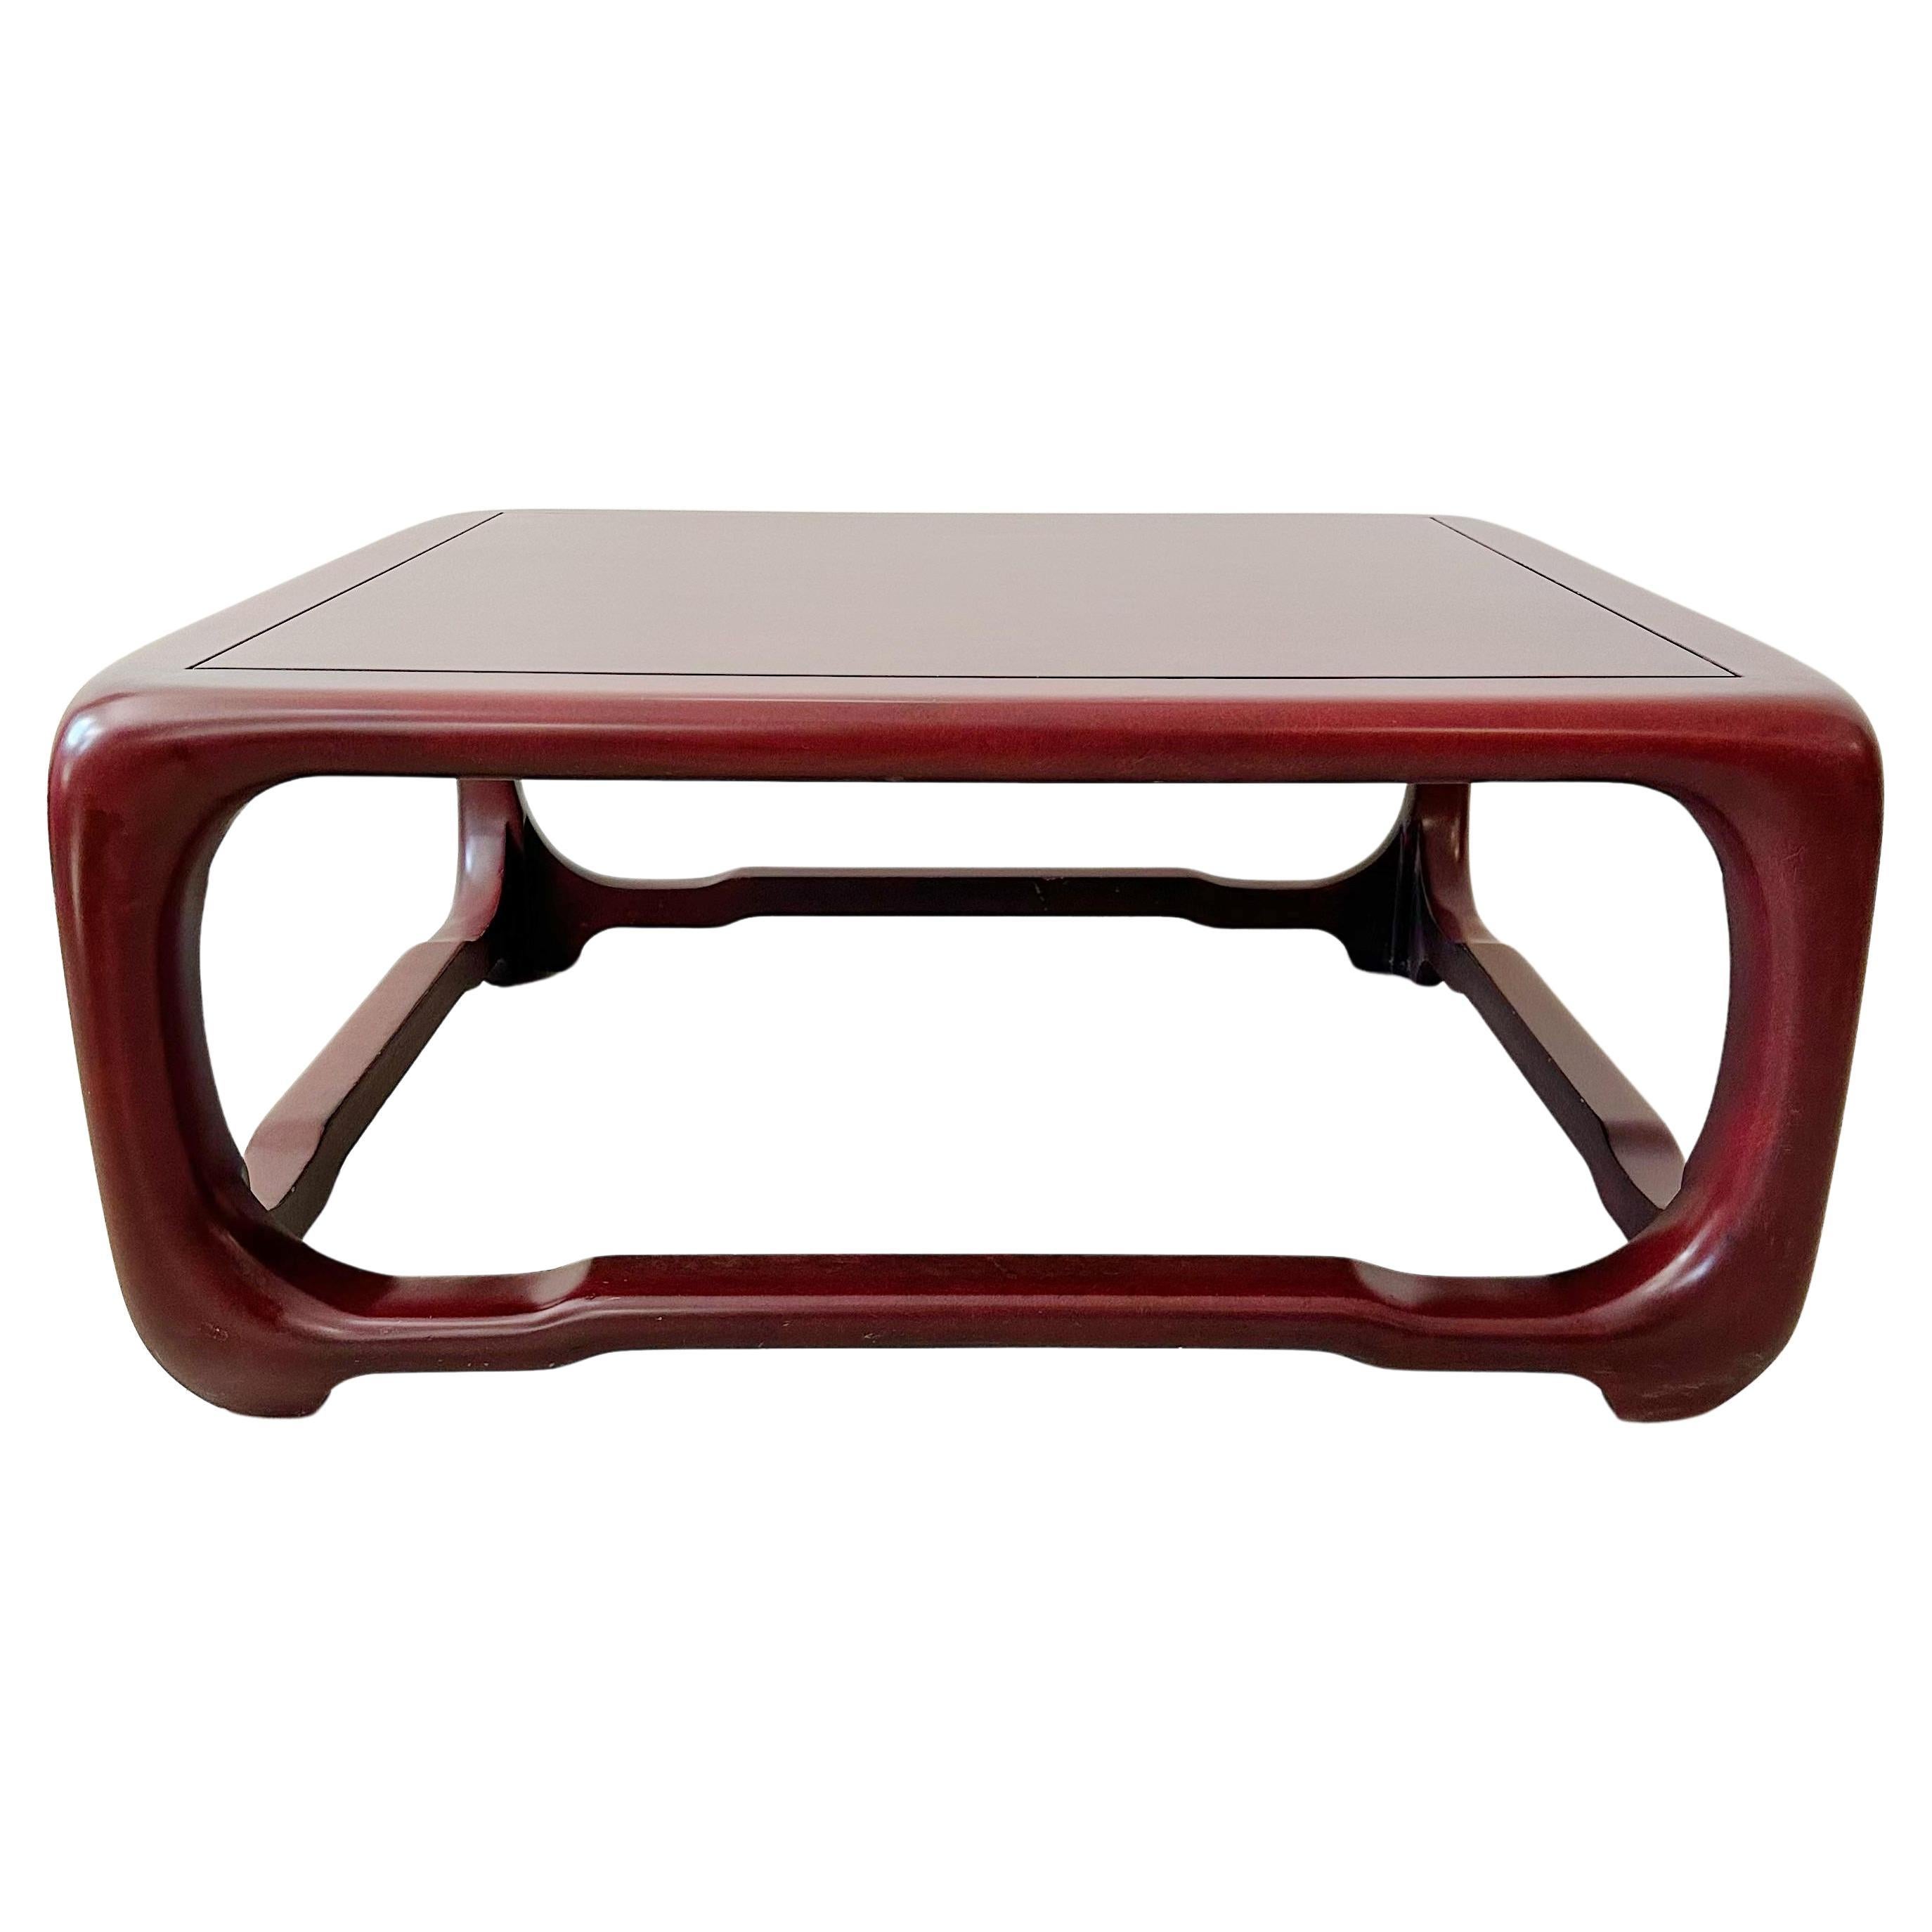 Karl Springer "Chinese Cube Style Coffee Table" in Lacquered Chinese Red 1980s For Sale